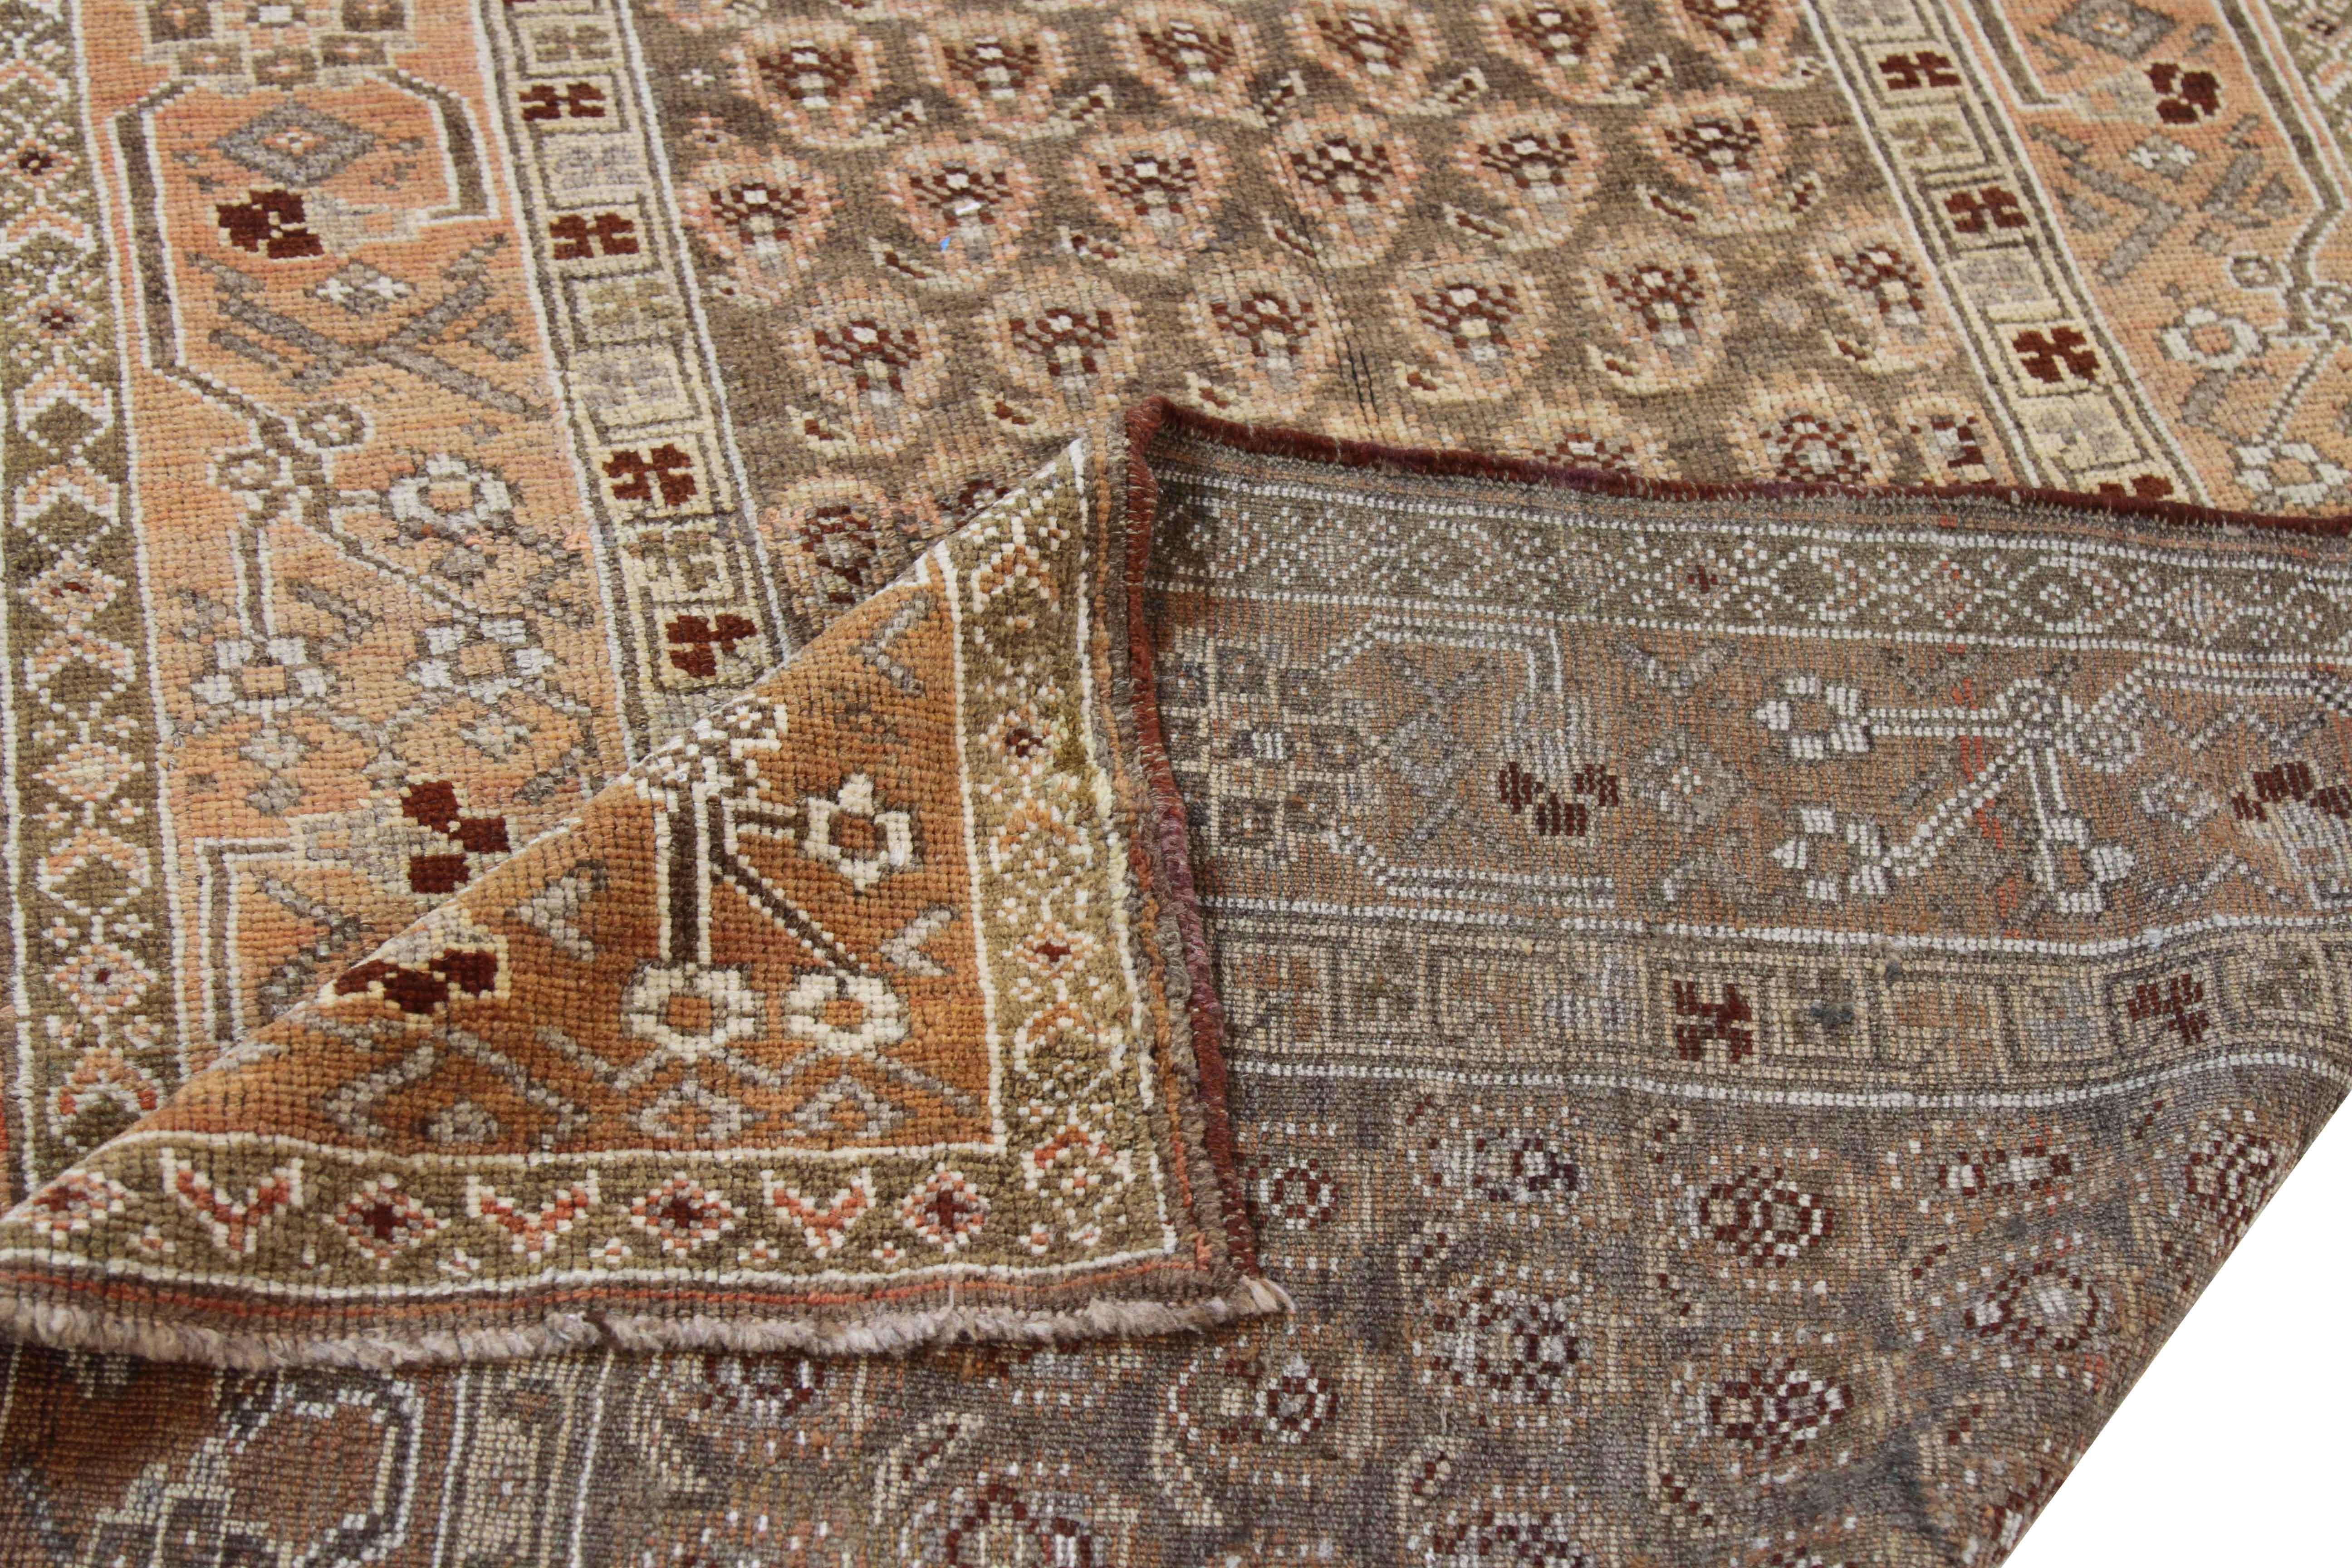 Crafted from the finest wool and vegetable dyes of the highest quality, this antique Persian rug features an elegant rendition of patterns native to Bijar weavers. The use of brown, red, rust and green is also favored by these master artisans which